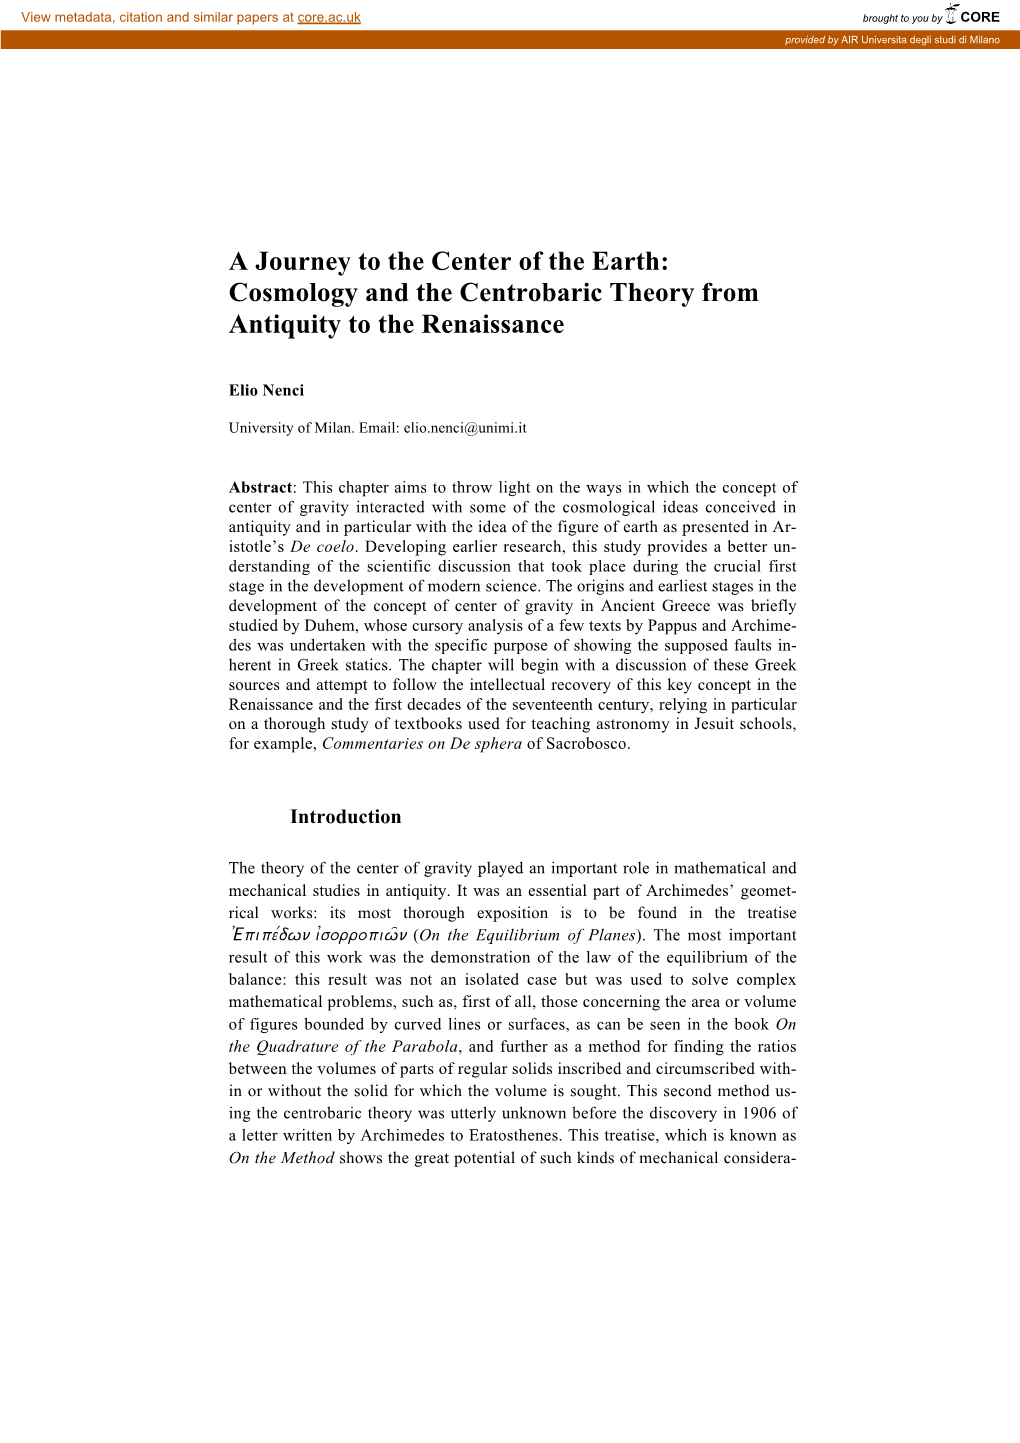 A Journey to the Center of the Earth: Cosmology and the Centrobaric Theory from Antiquity to the Renaissance